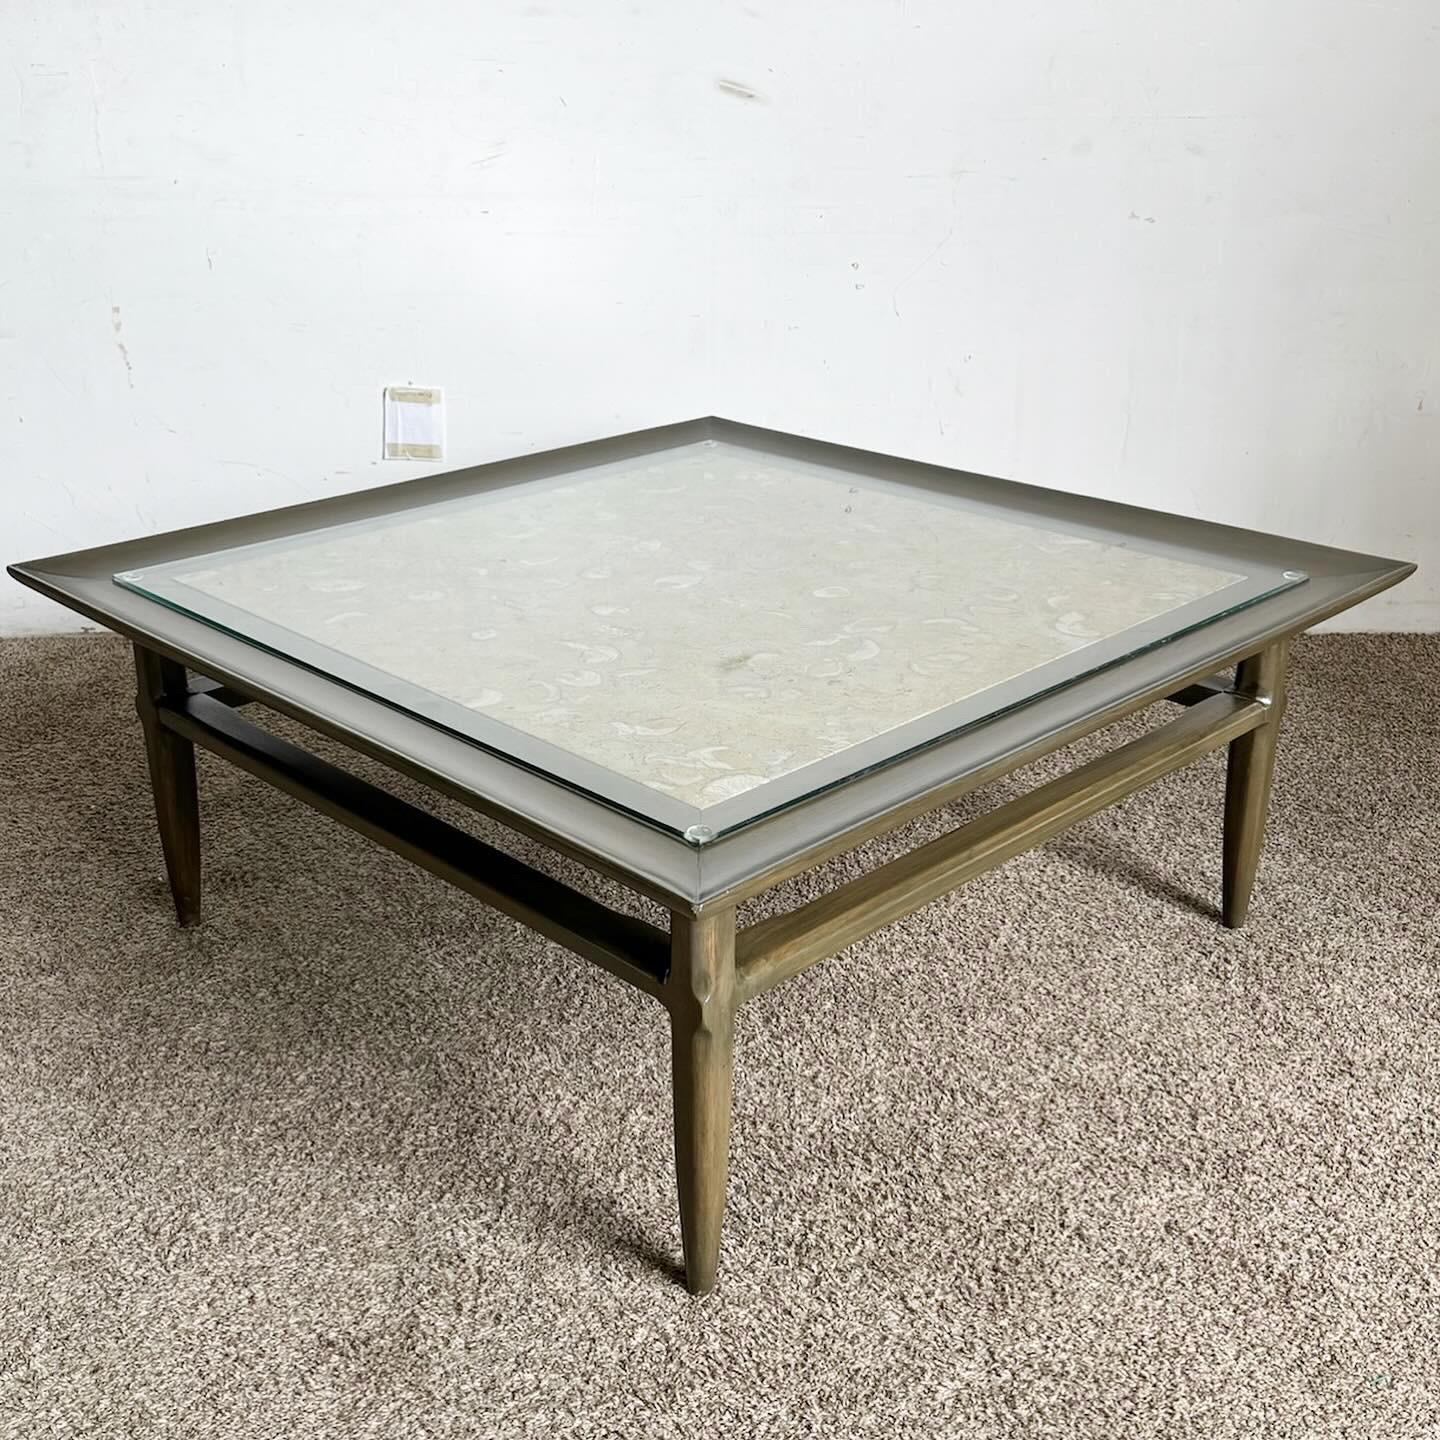 20th Century Mid Century Modern Wooden Square Coffee Table With Portuguese Marble Inlayed Top For Sale